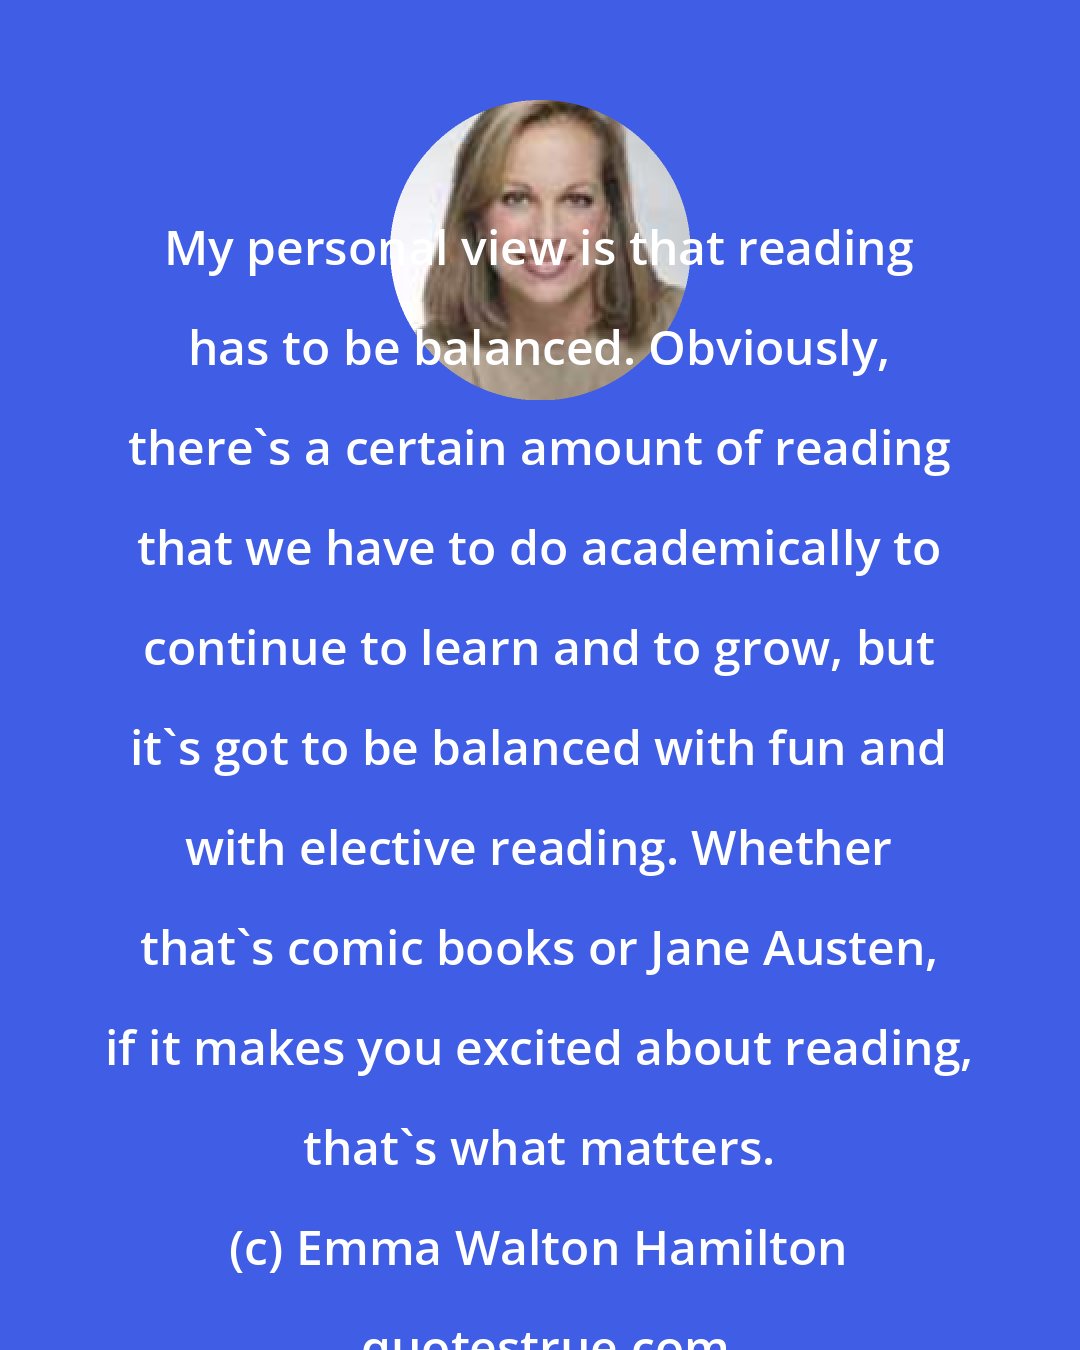 Emma Walton Hamilton: My personal view is that reading has to be balanced. Obviously, there's a certain amount of reading that we have to do academically to continue to learn and to grow, but it's got to be balanced with fun and with elective reading. Whether that's comic books or Jane Austen, if it makes you excited about reading, that's what matters.